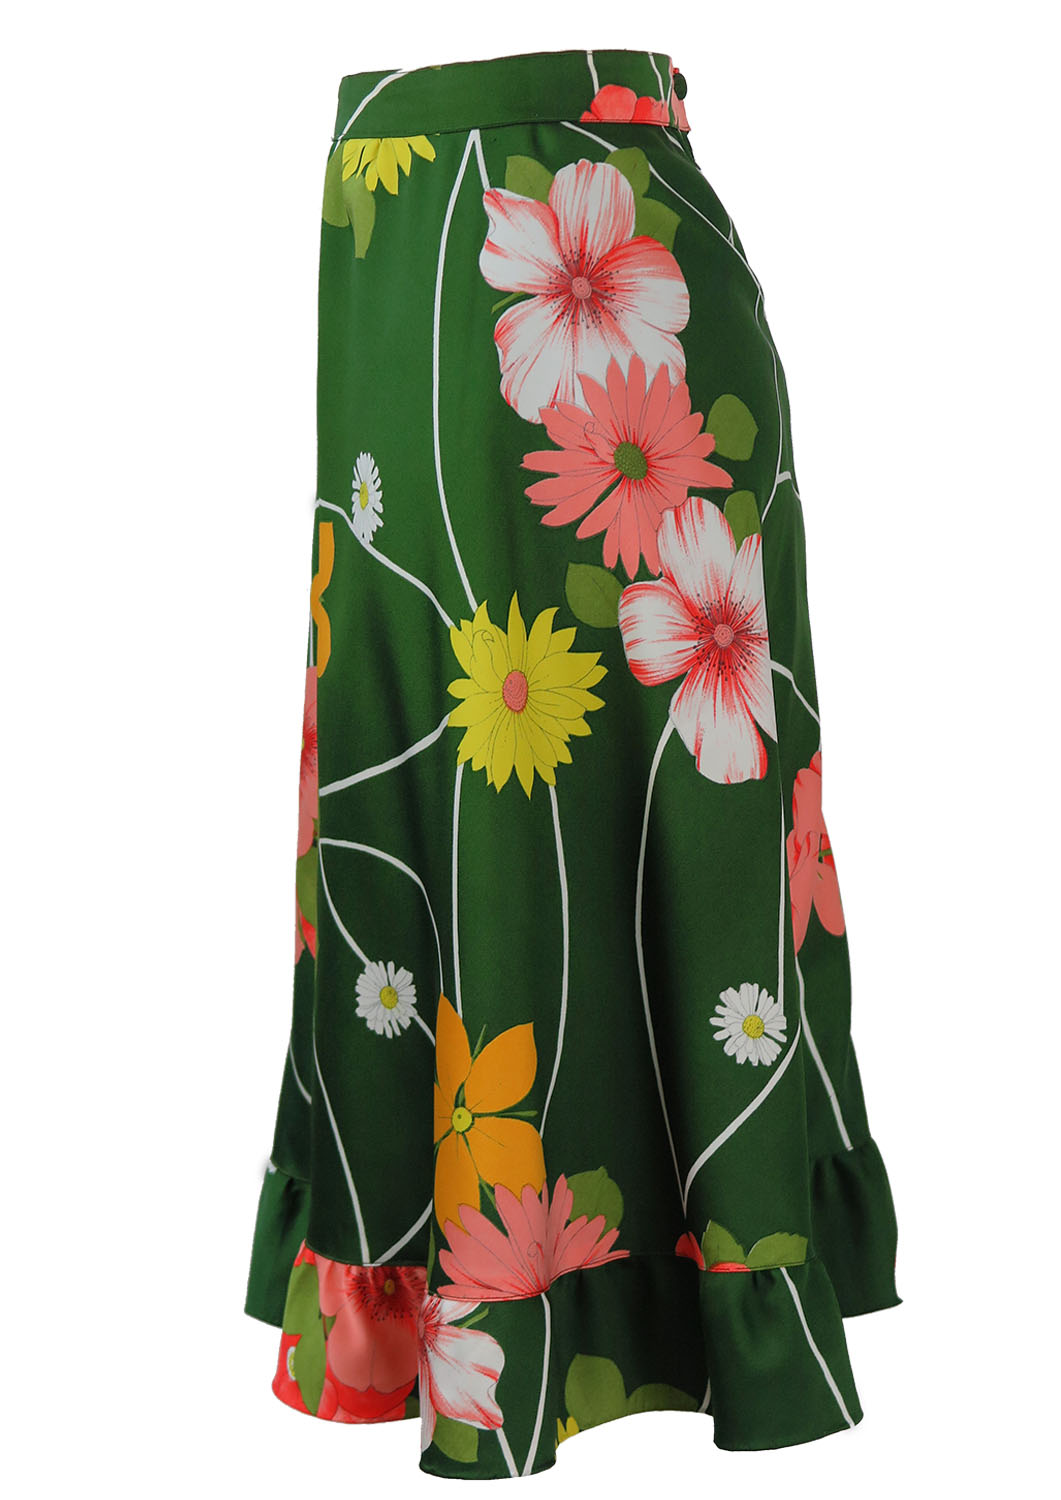 Green Flared Knee Length Skirt with Floral Pattern - S | Reign Vintage